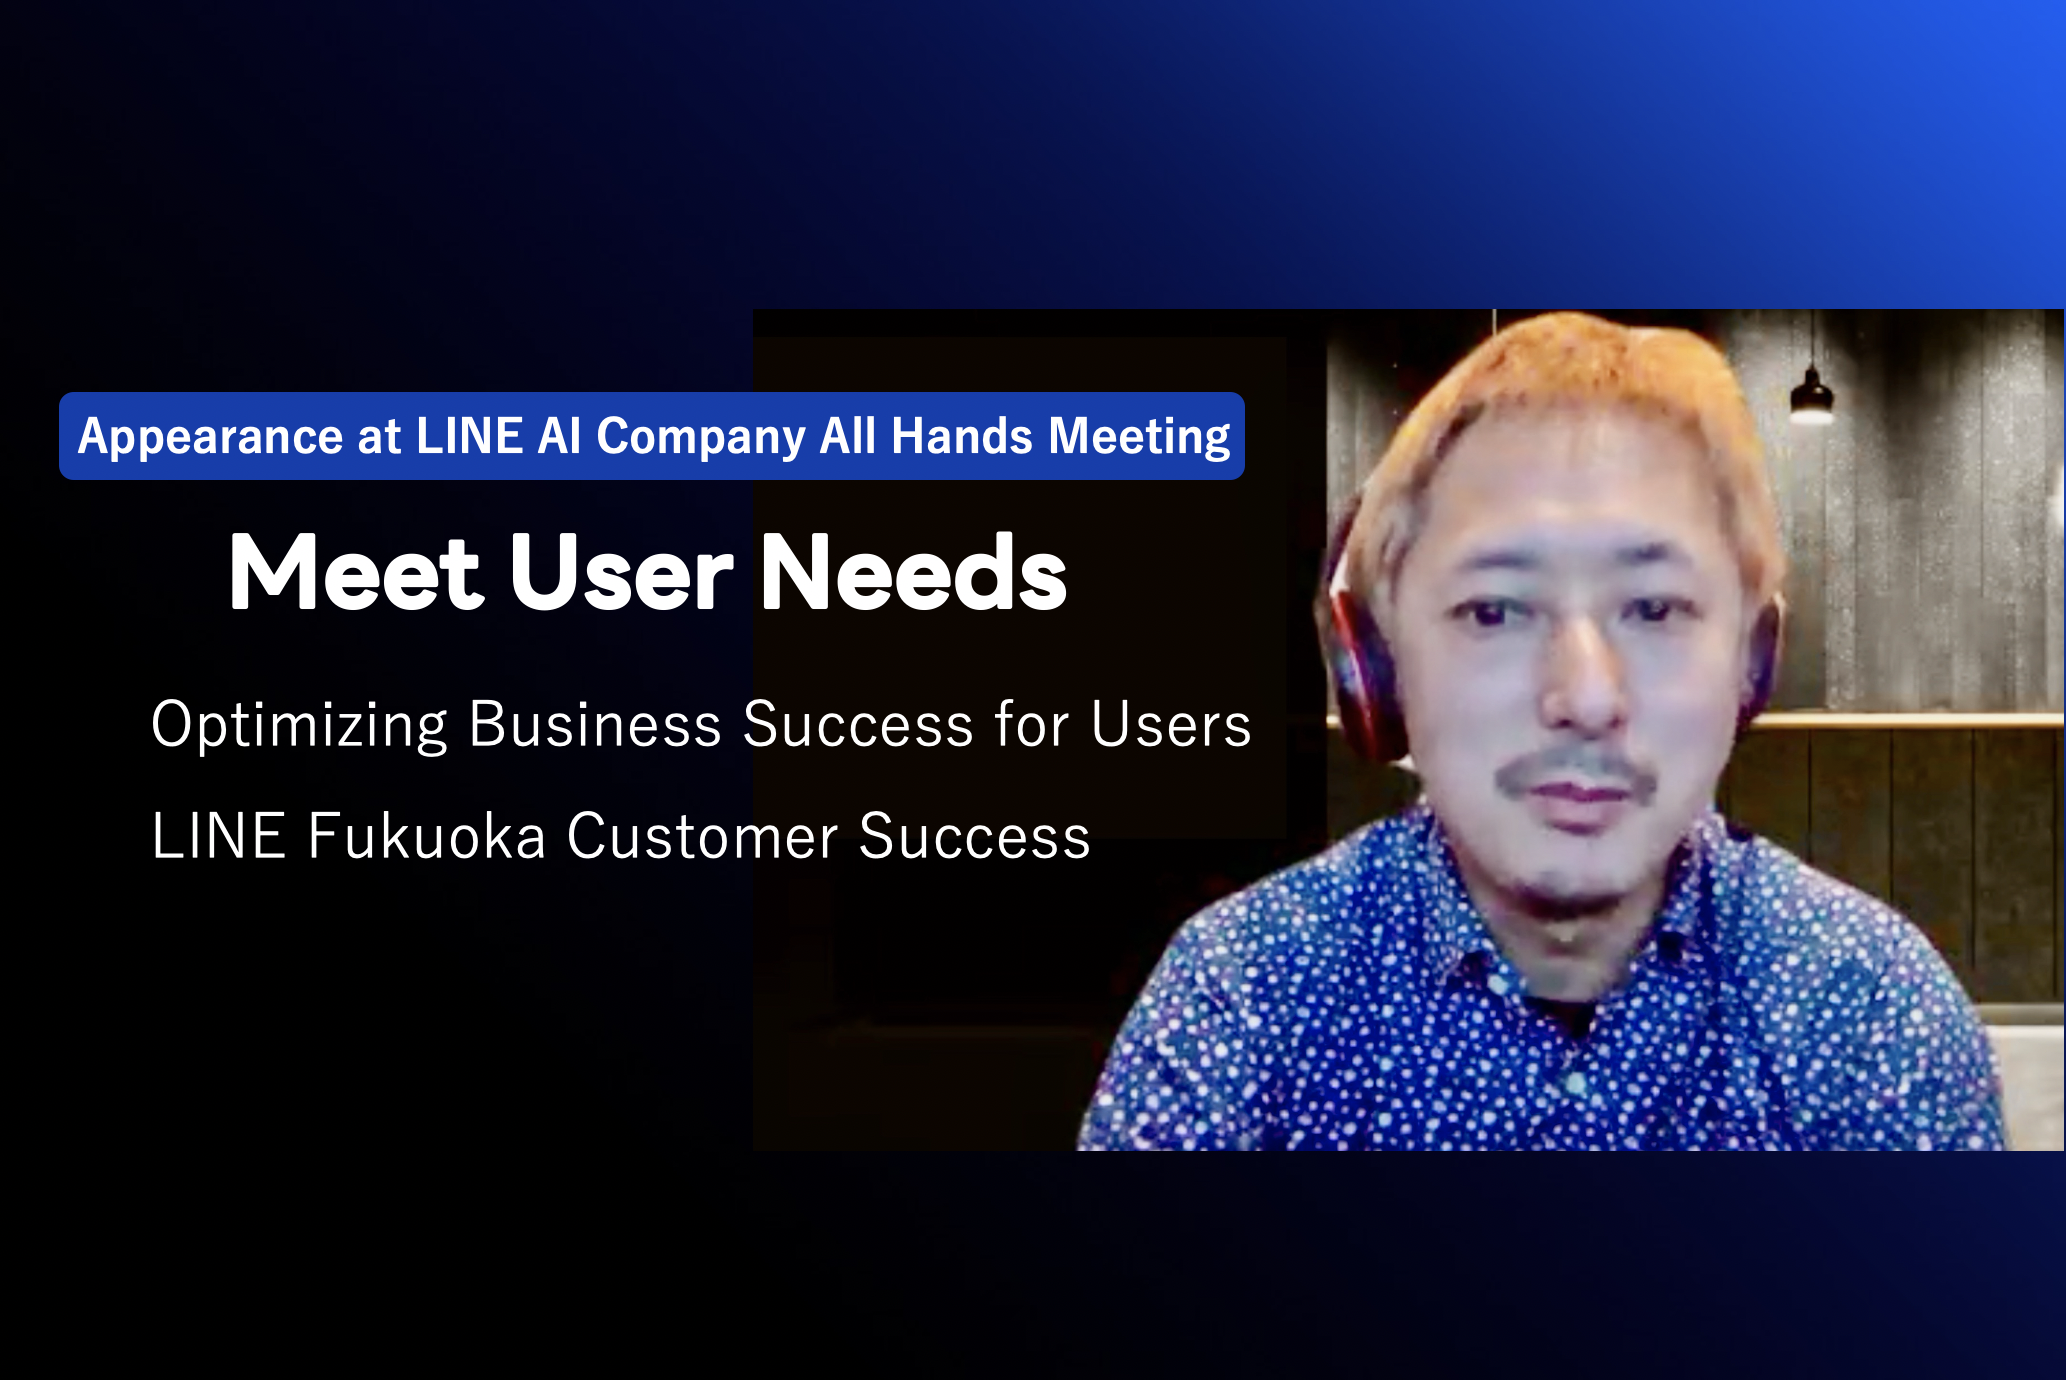 Customer Success Planning Department's Mr. Kato Takes the Stage at LINE AI Company All Hands Meeting サムネイル画像